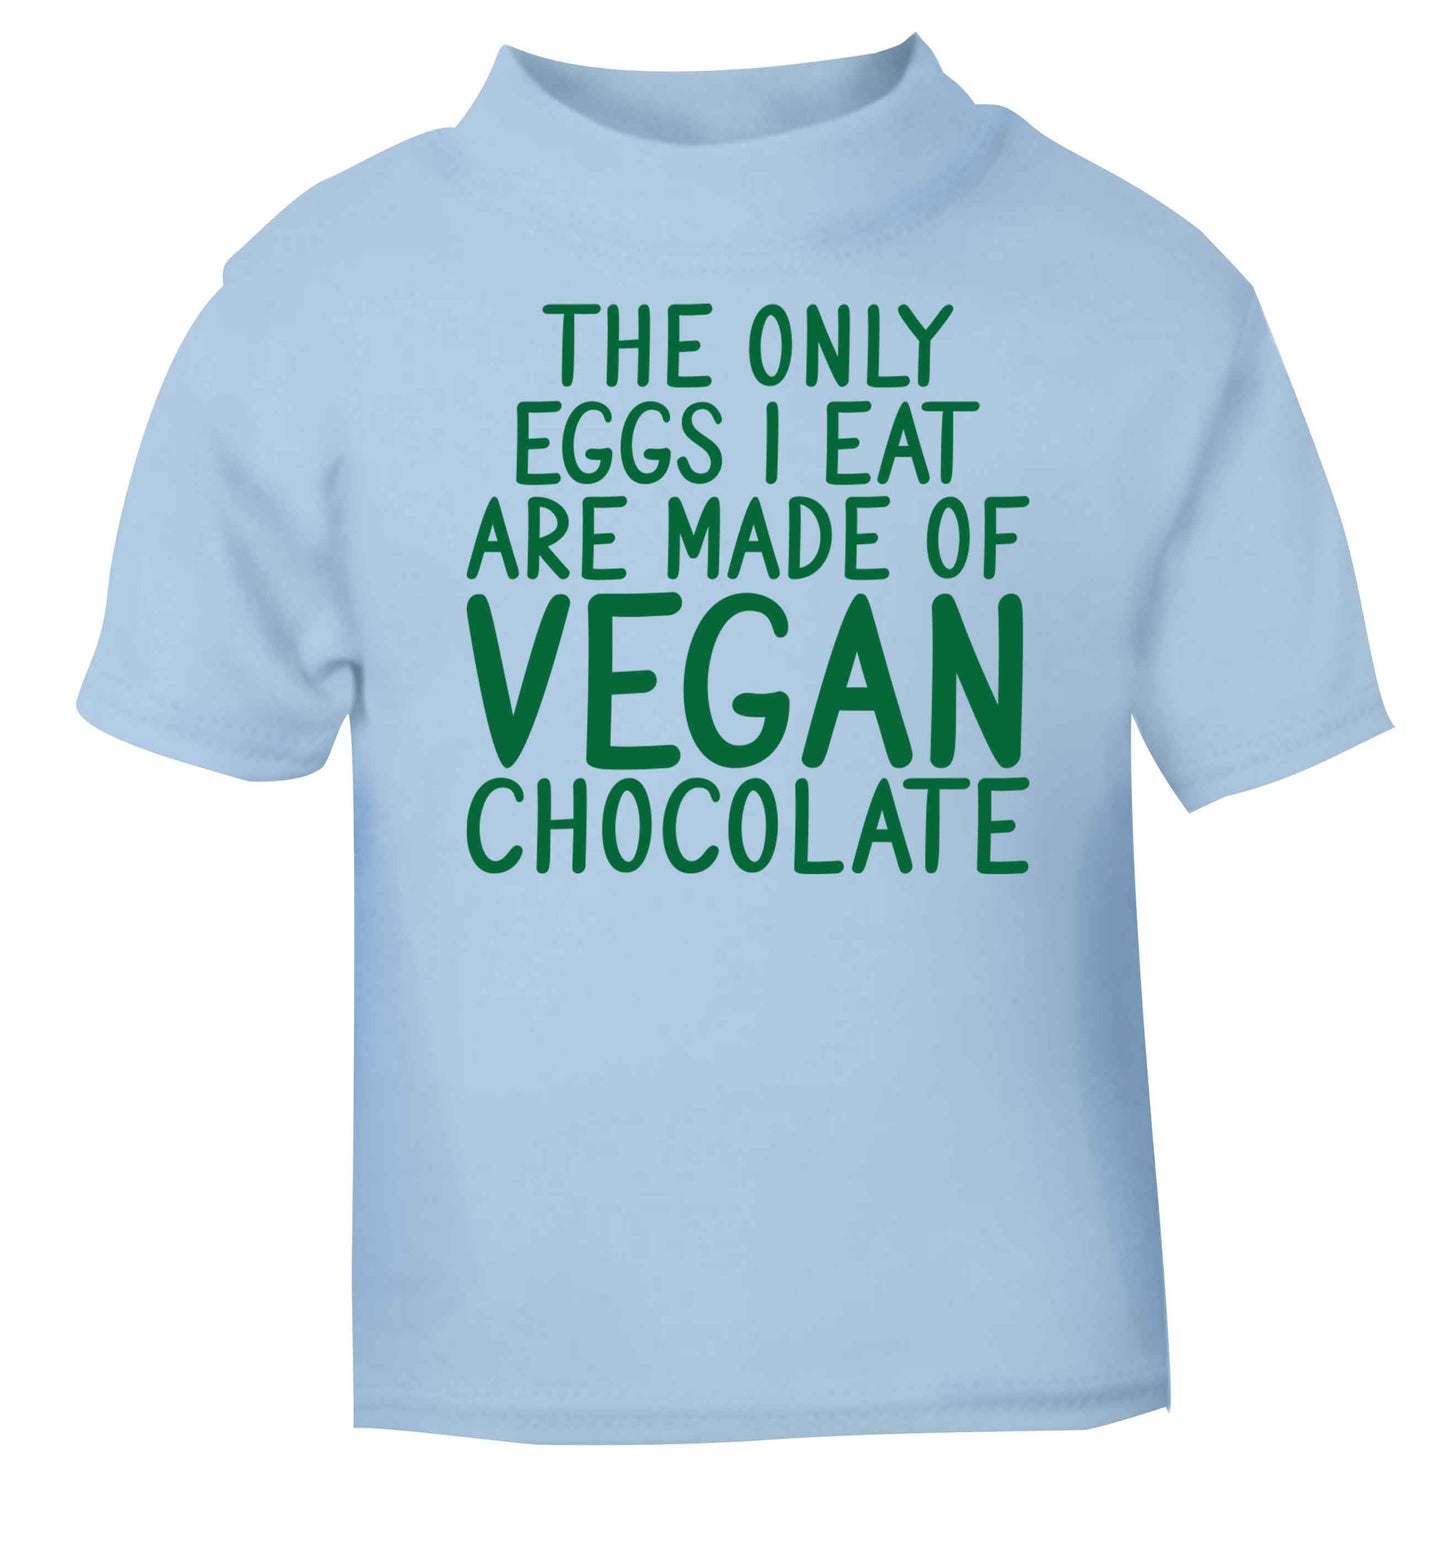 The only eggs I eat are made of vegan chocolate light blue baby toddler Tshirt 2 Years